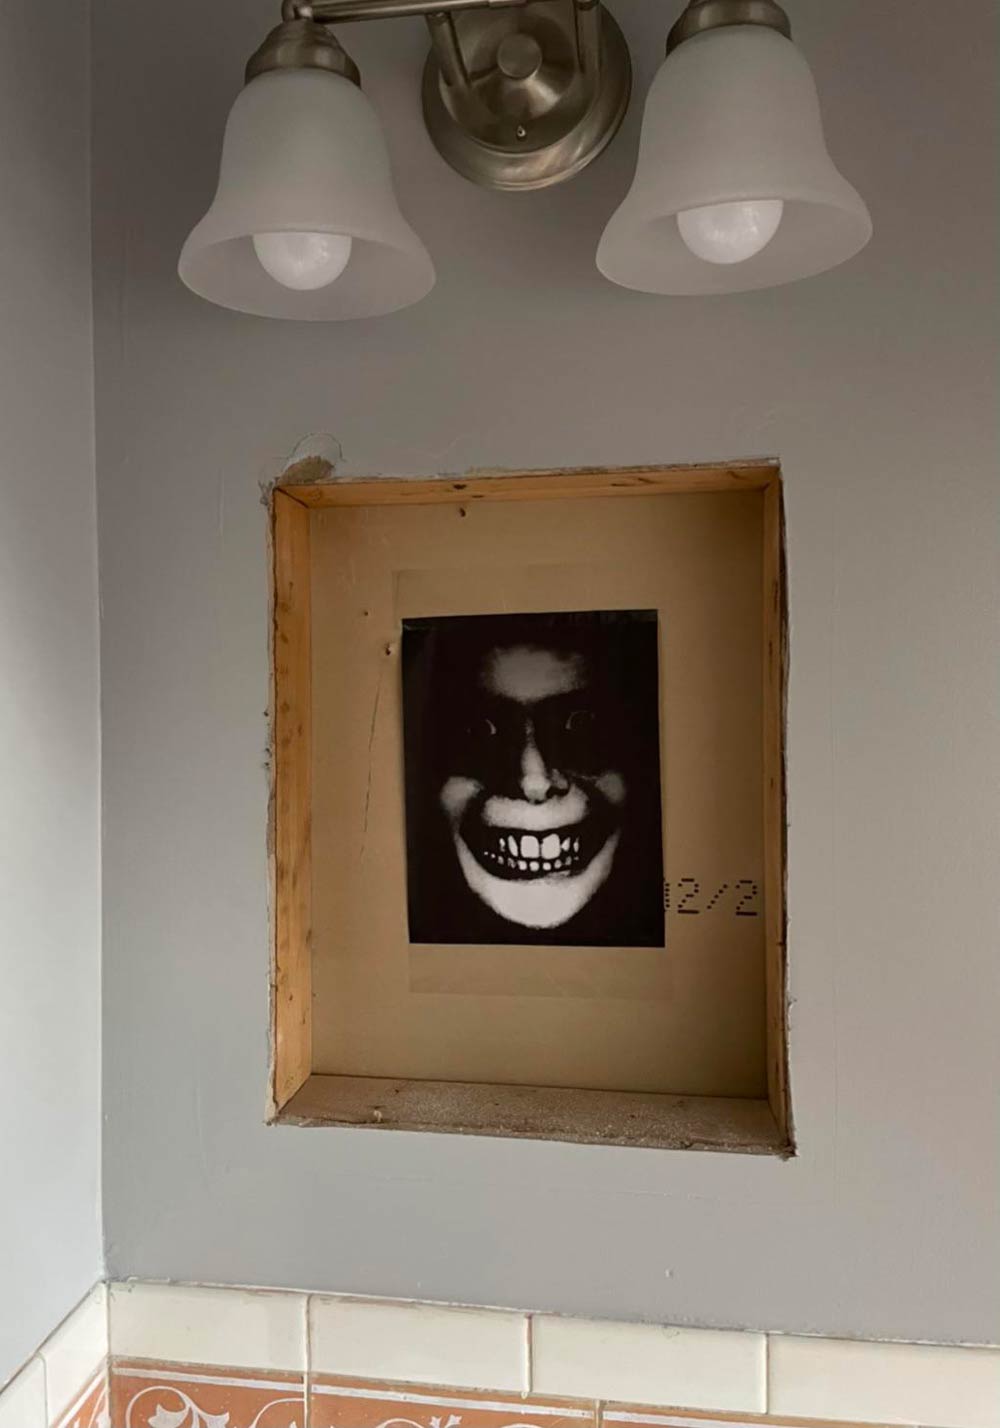 Had to take down my medicine cabinet to paint, so we left a fun surprise for the next homeowners